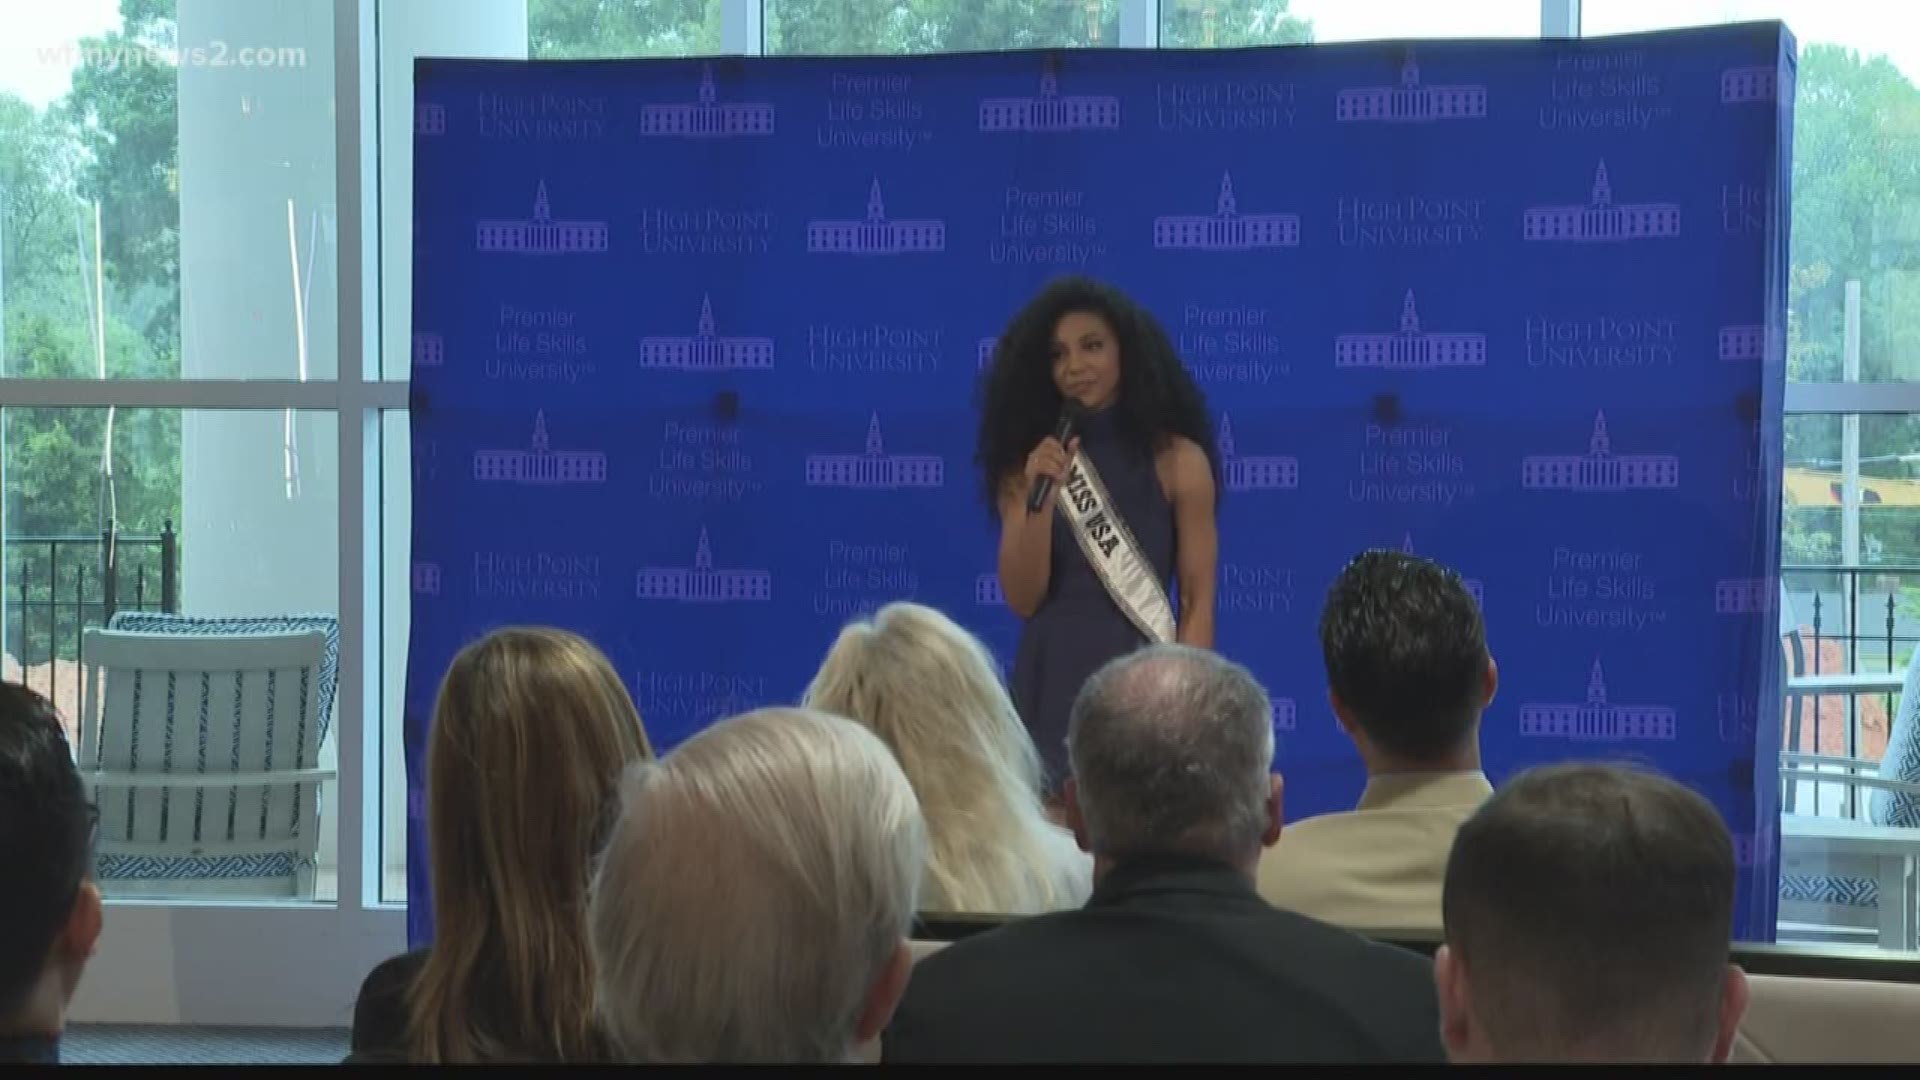 Cheslie Kryst returned to High Point today where she was first crowned Miss North Carolina.